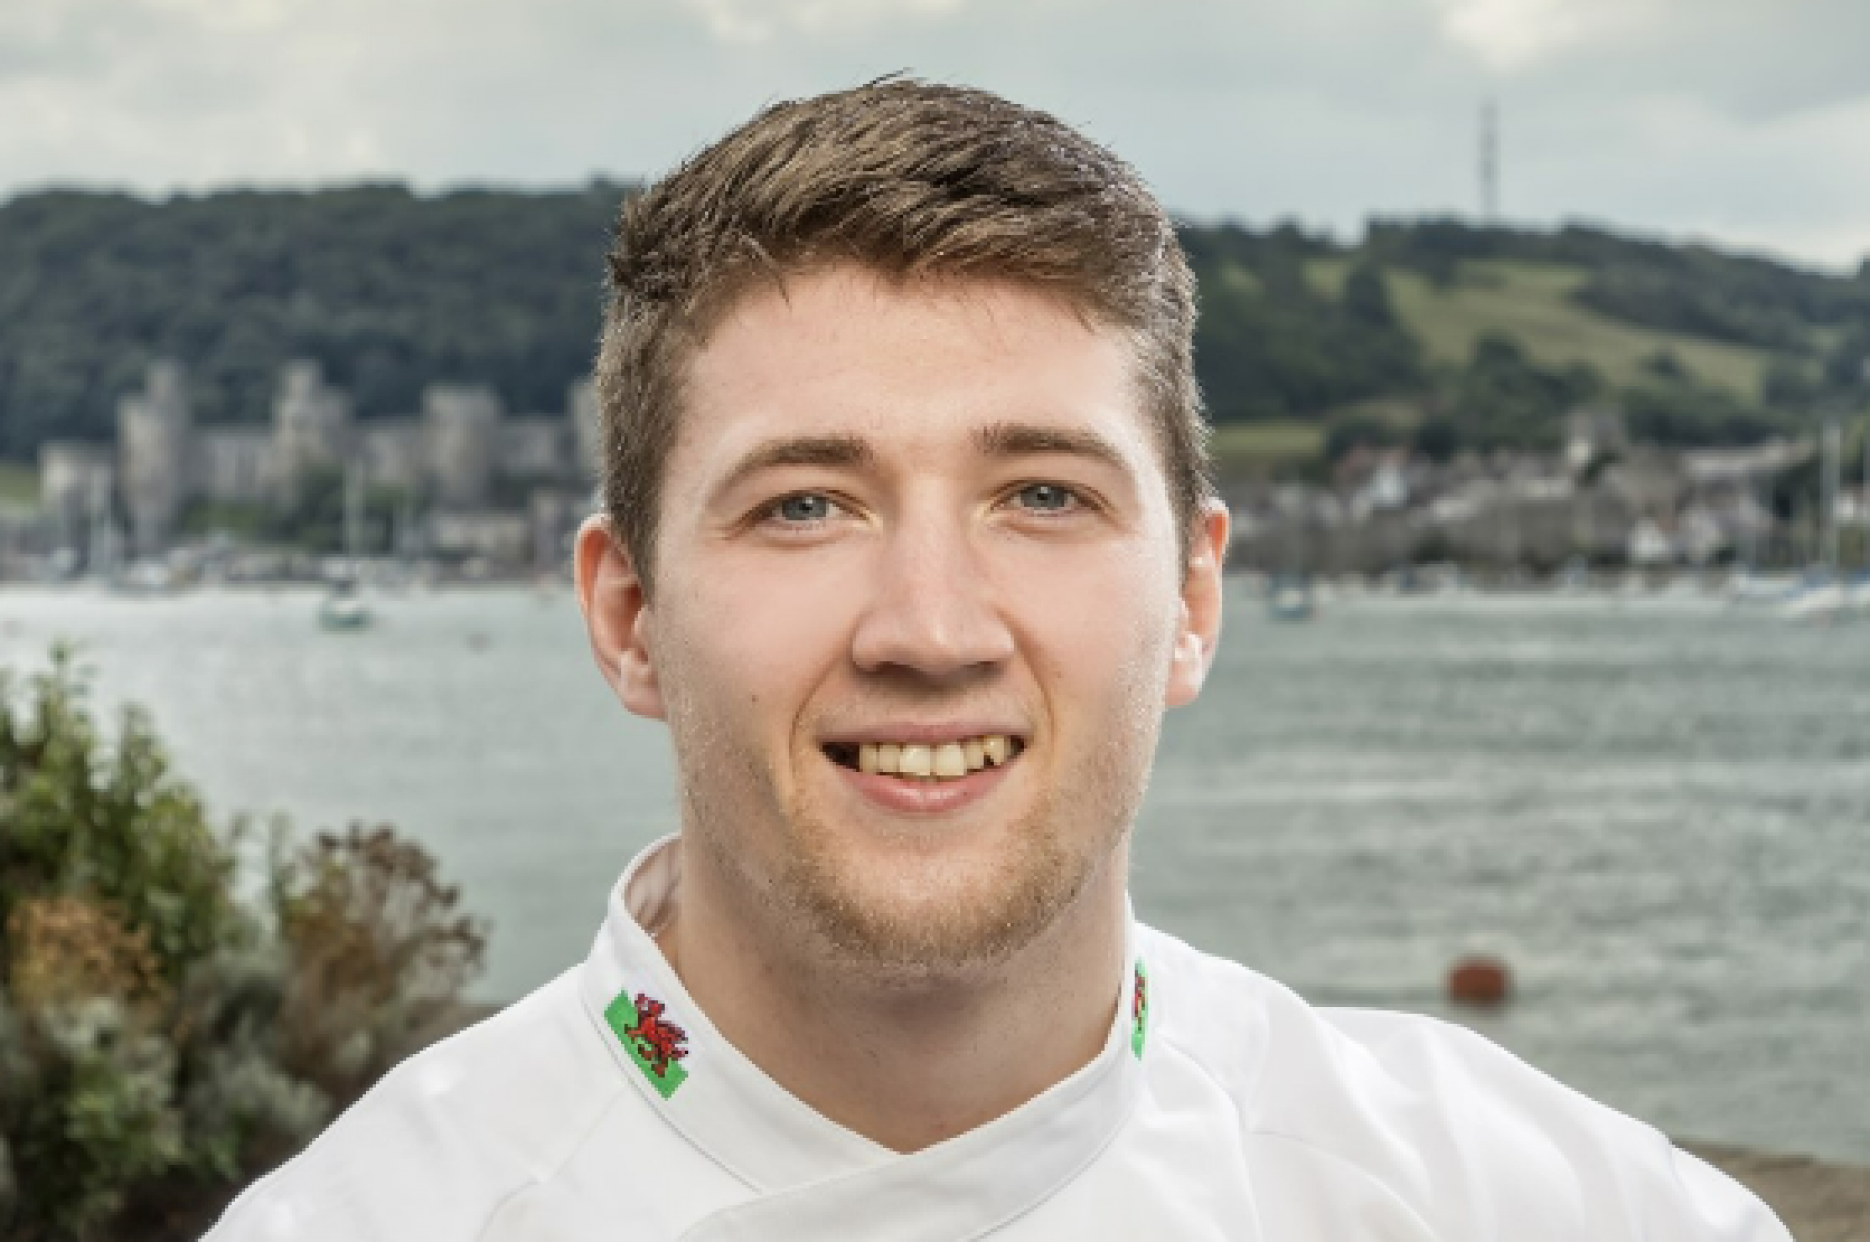 Sion Hughes, 25, head chef at The Spa at Carden Park